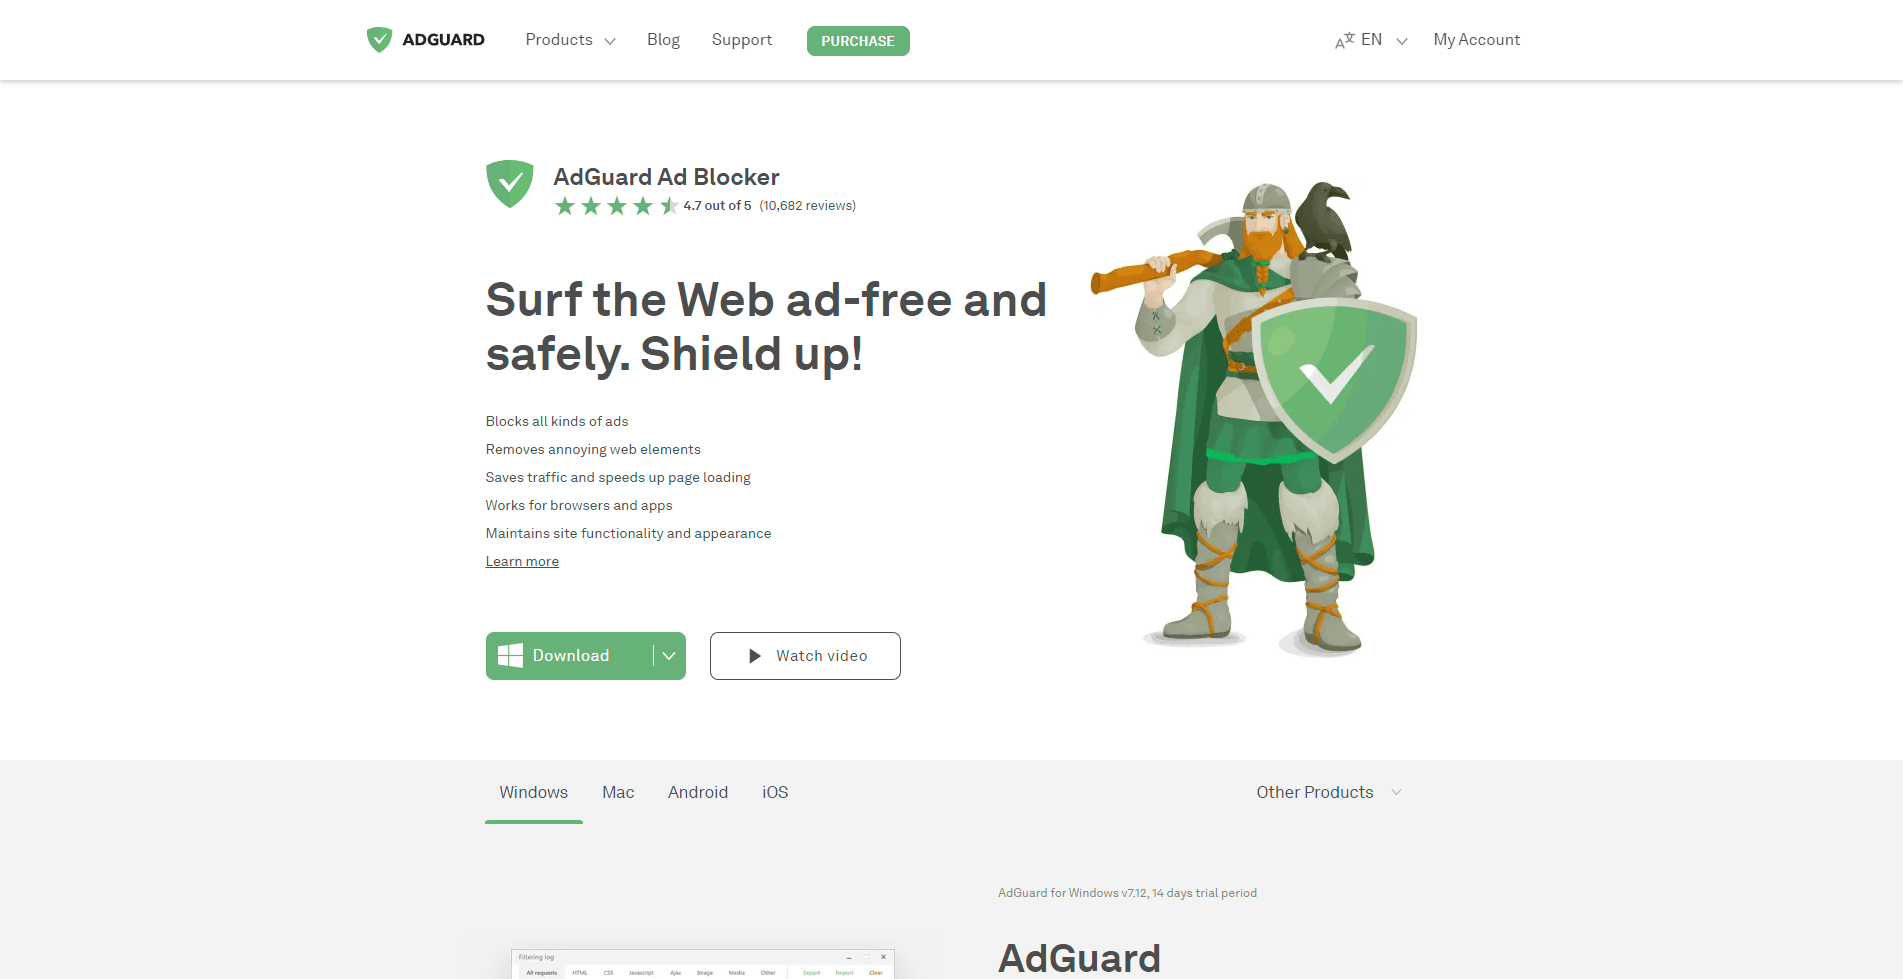 adguard is preventing browsing